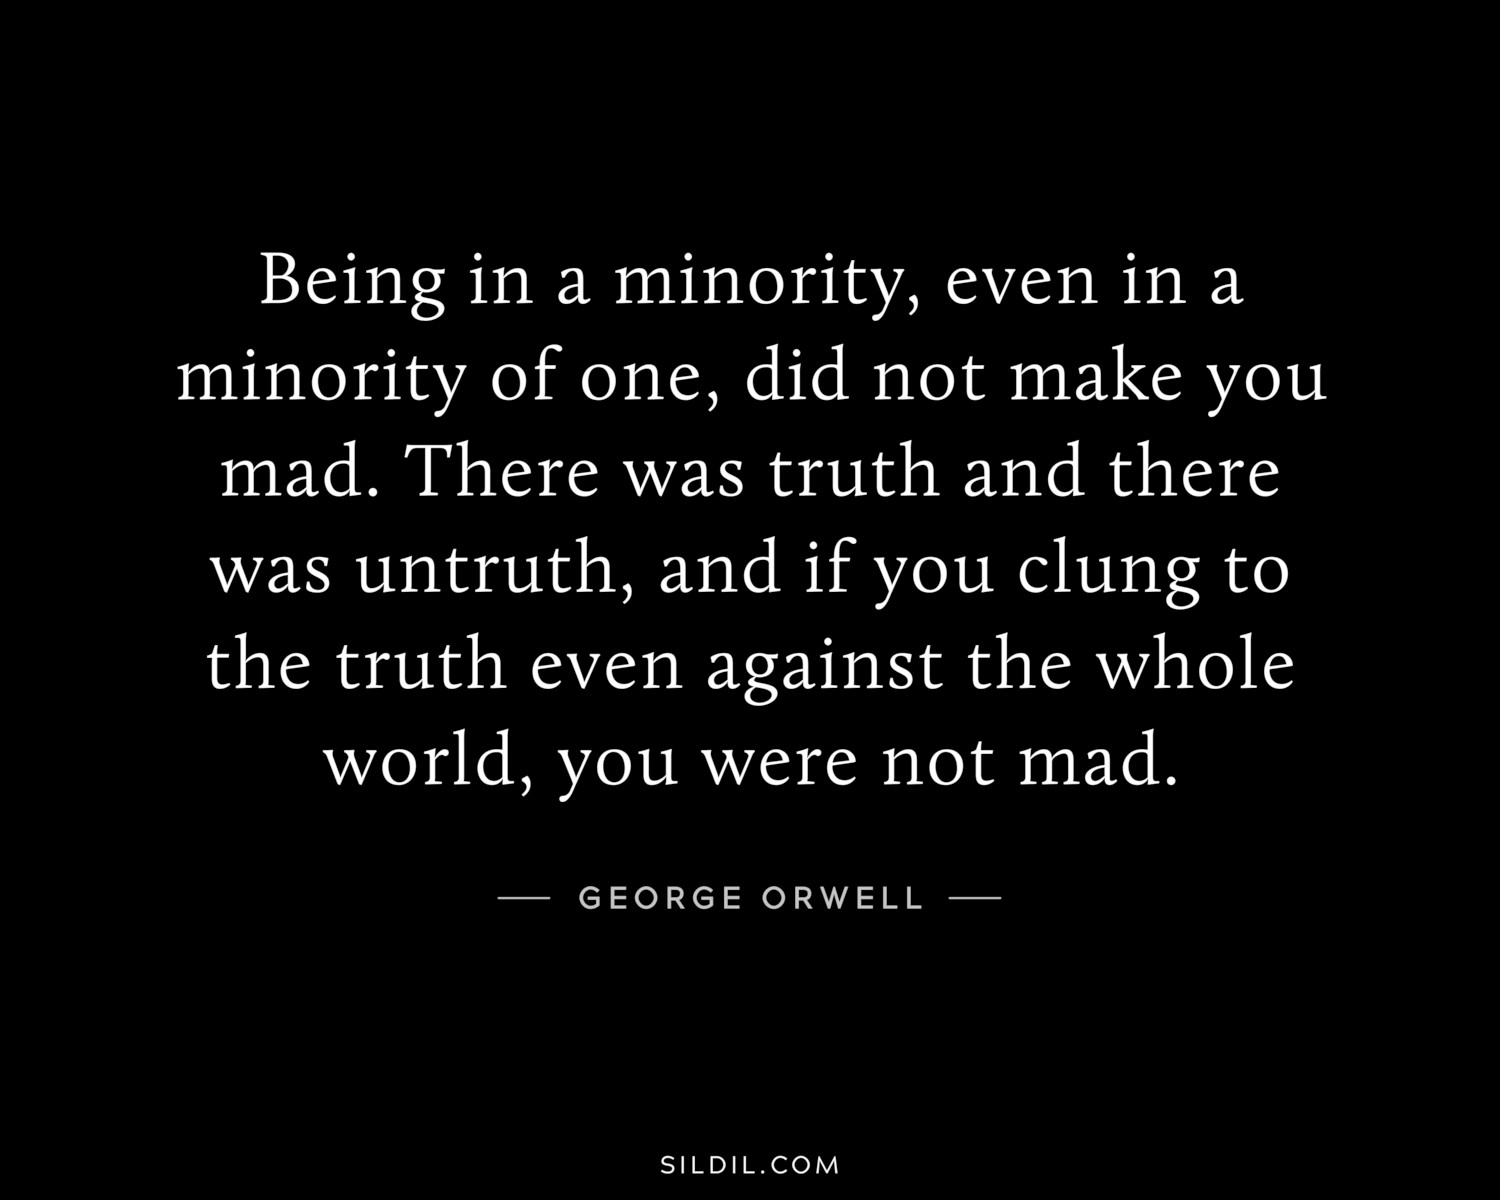 Being in a minority, even in a minority of one, did not make you mad. There was truth and there was untruth, and if you clung to the truth even against the whole world, you were not mad.